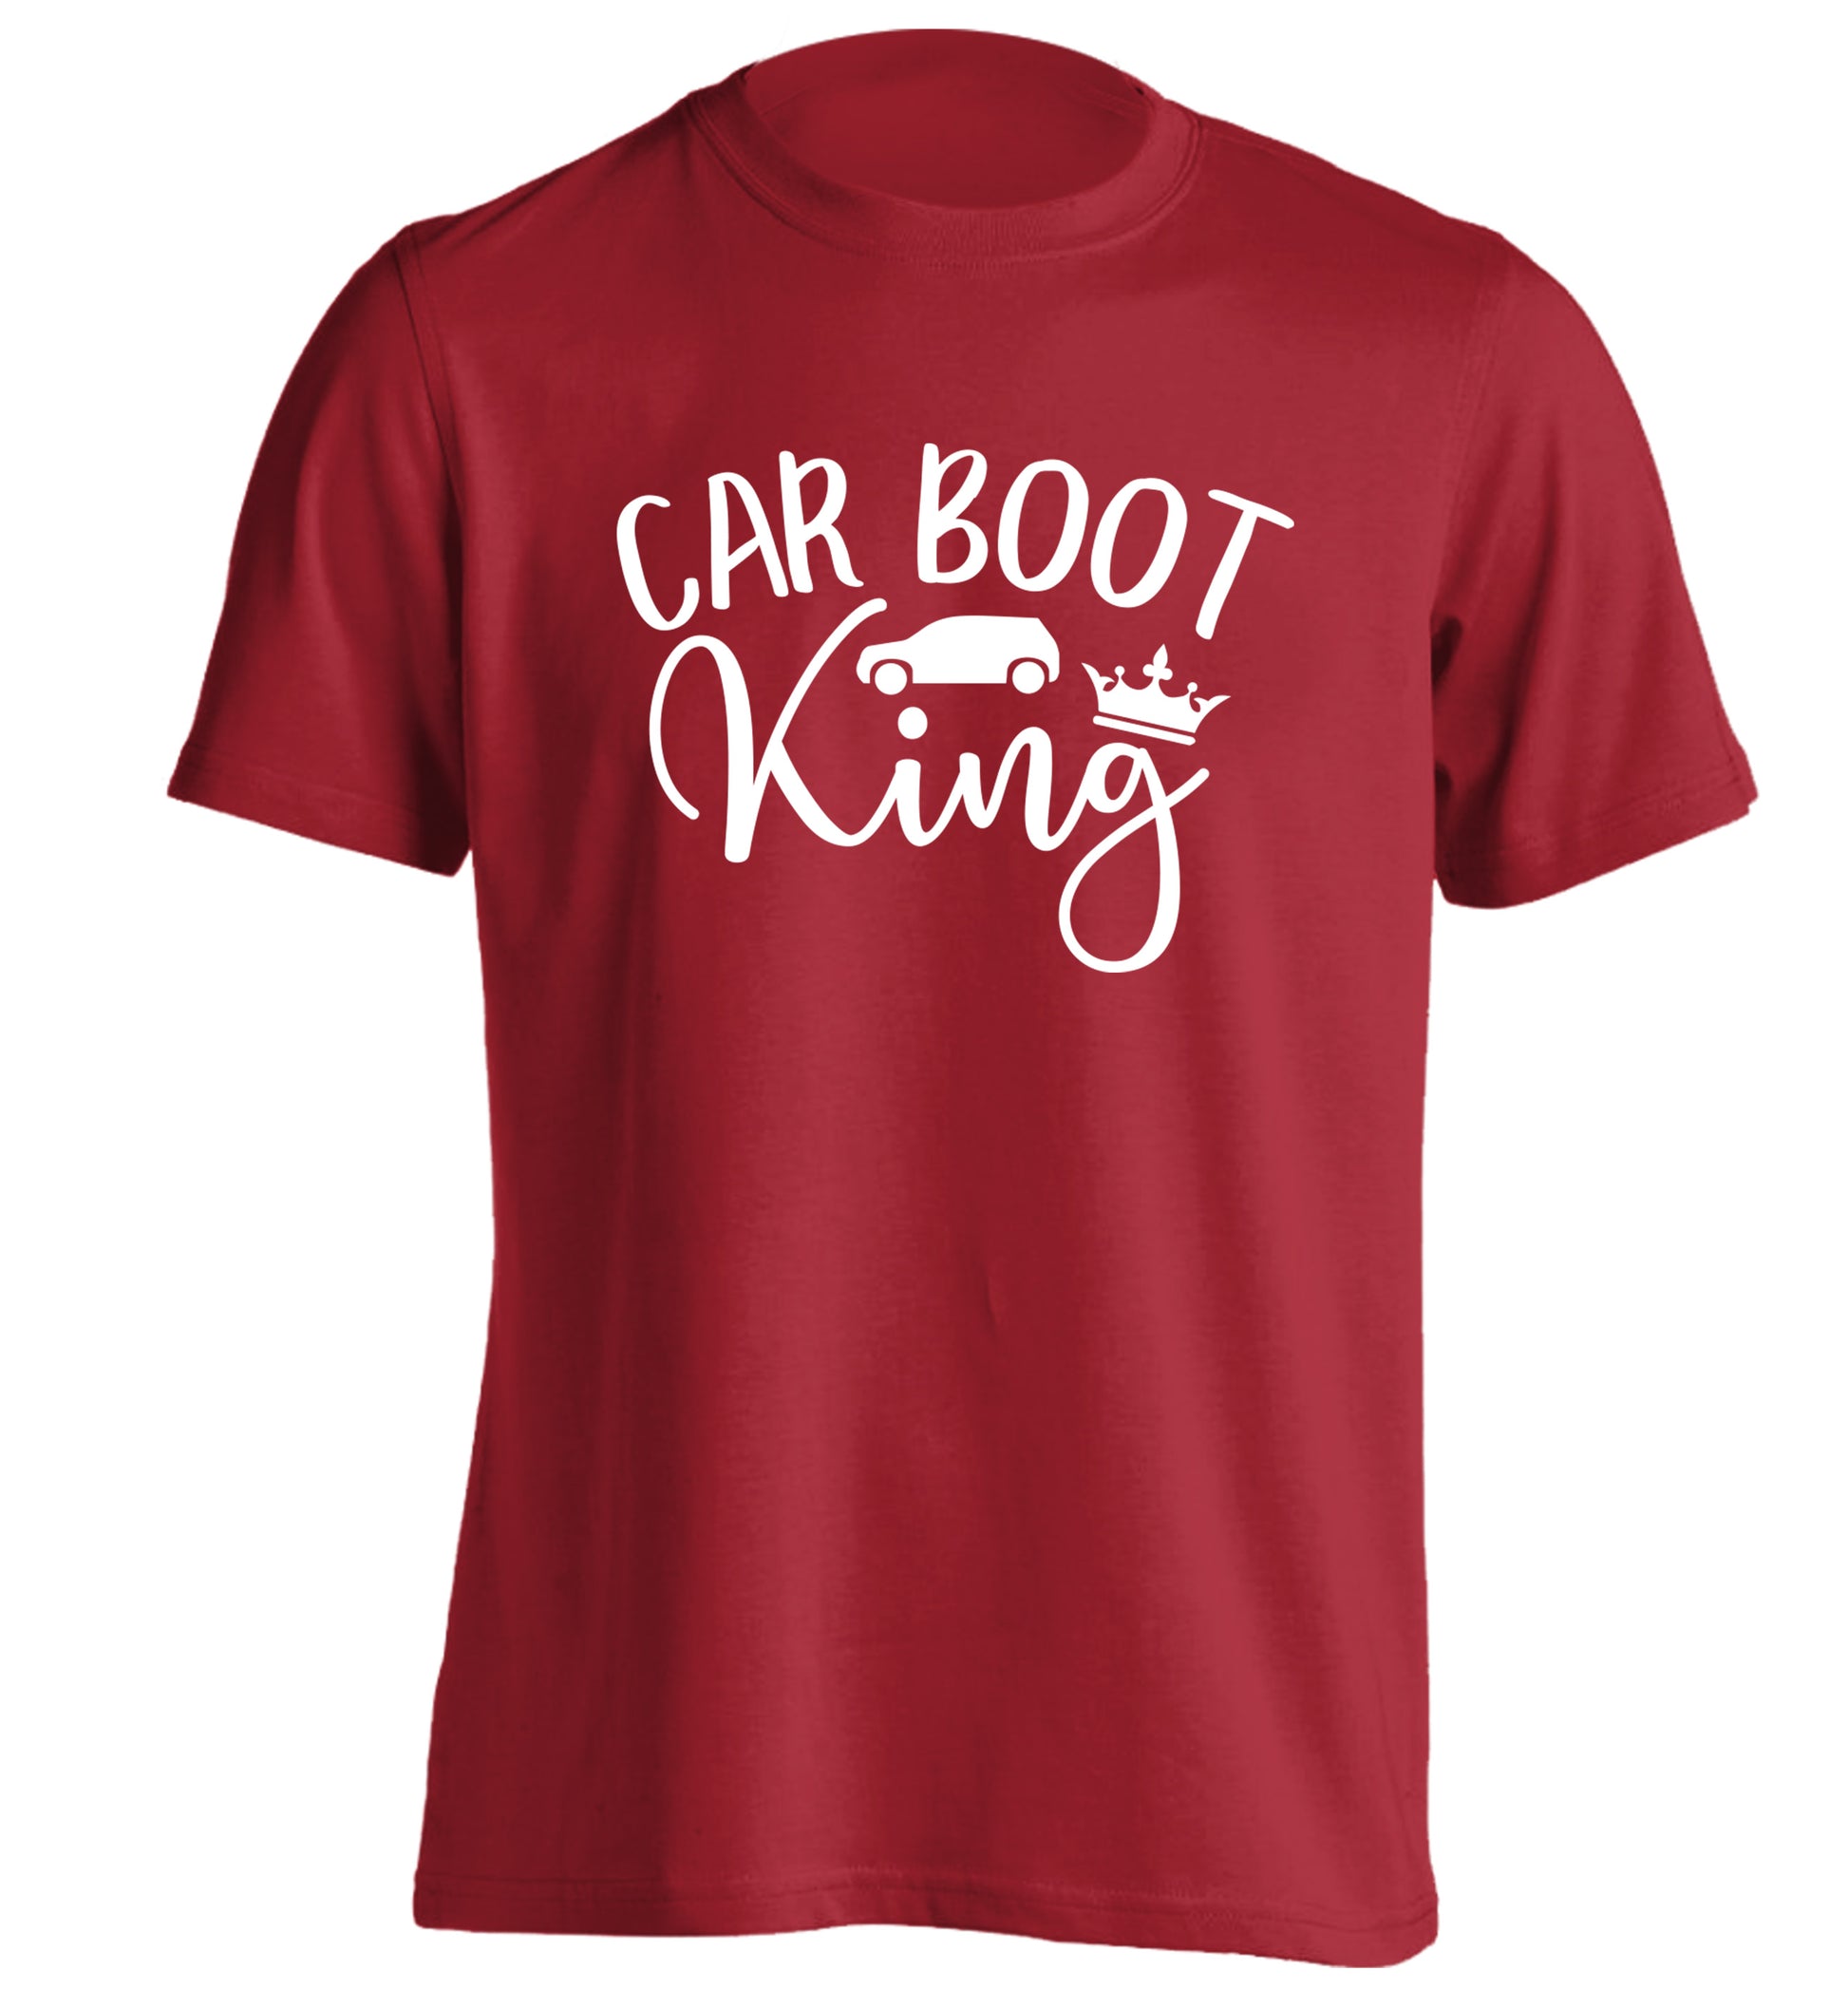 Carboot King adults unisex red Tshirt 2XL